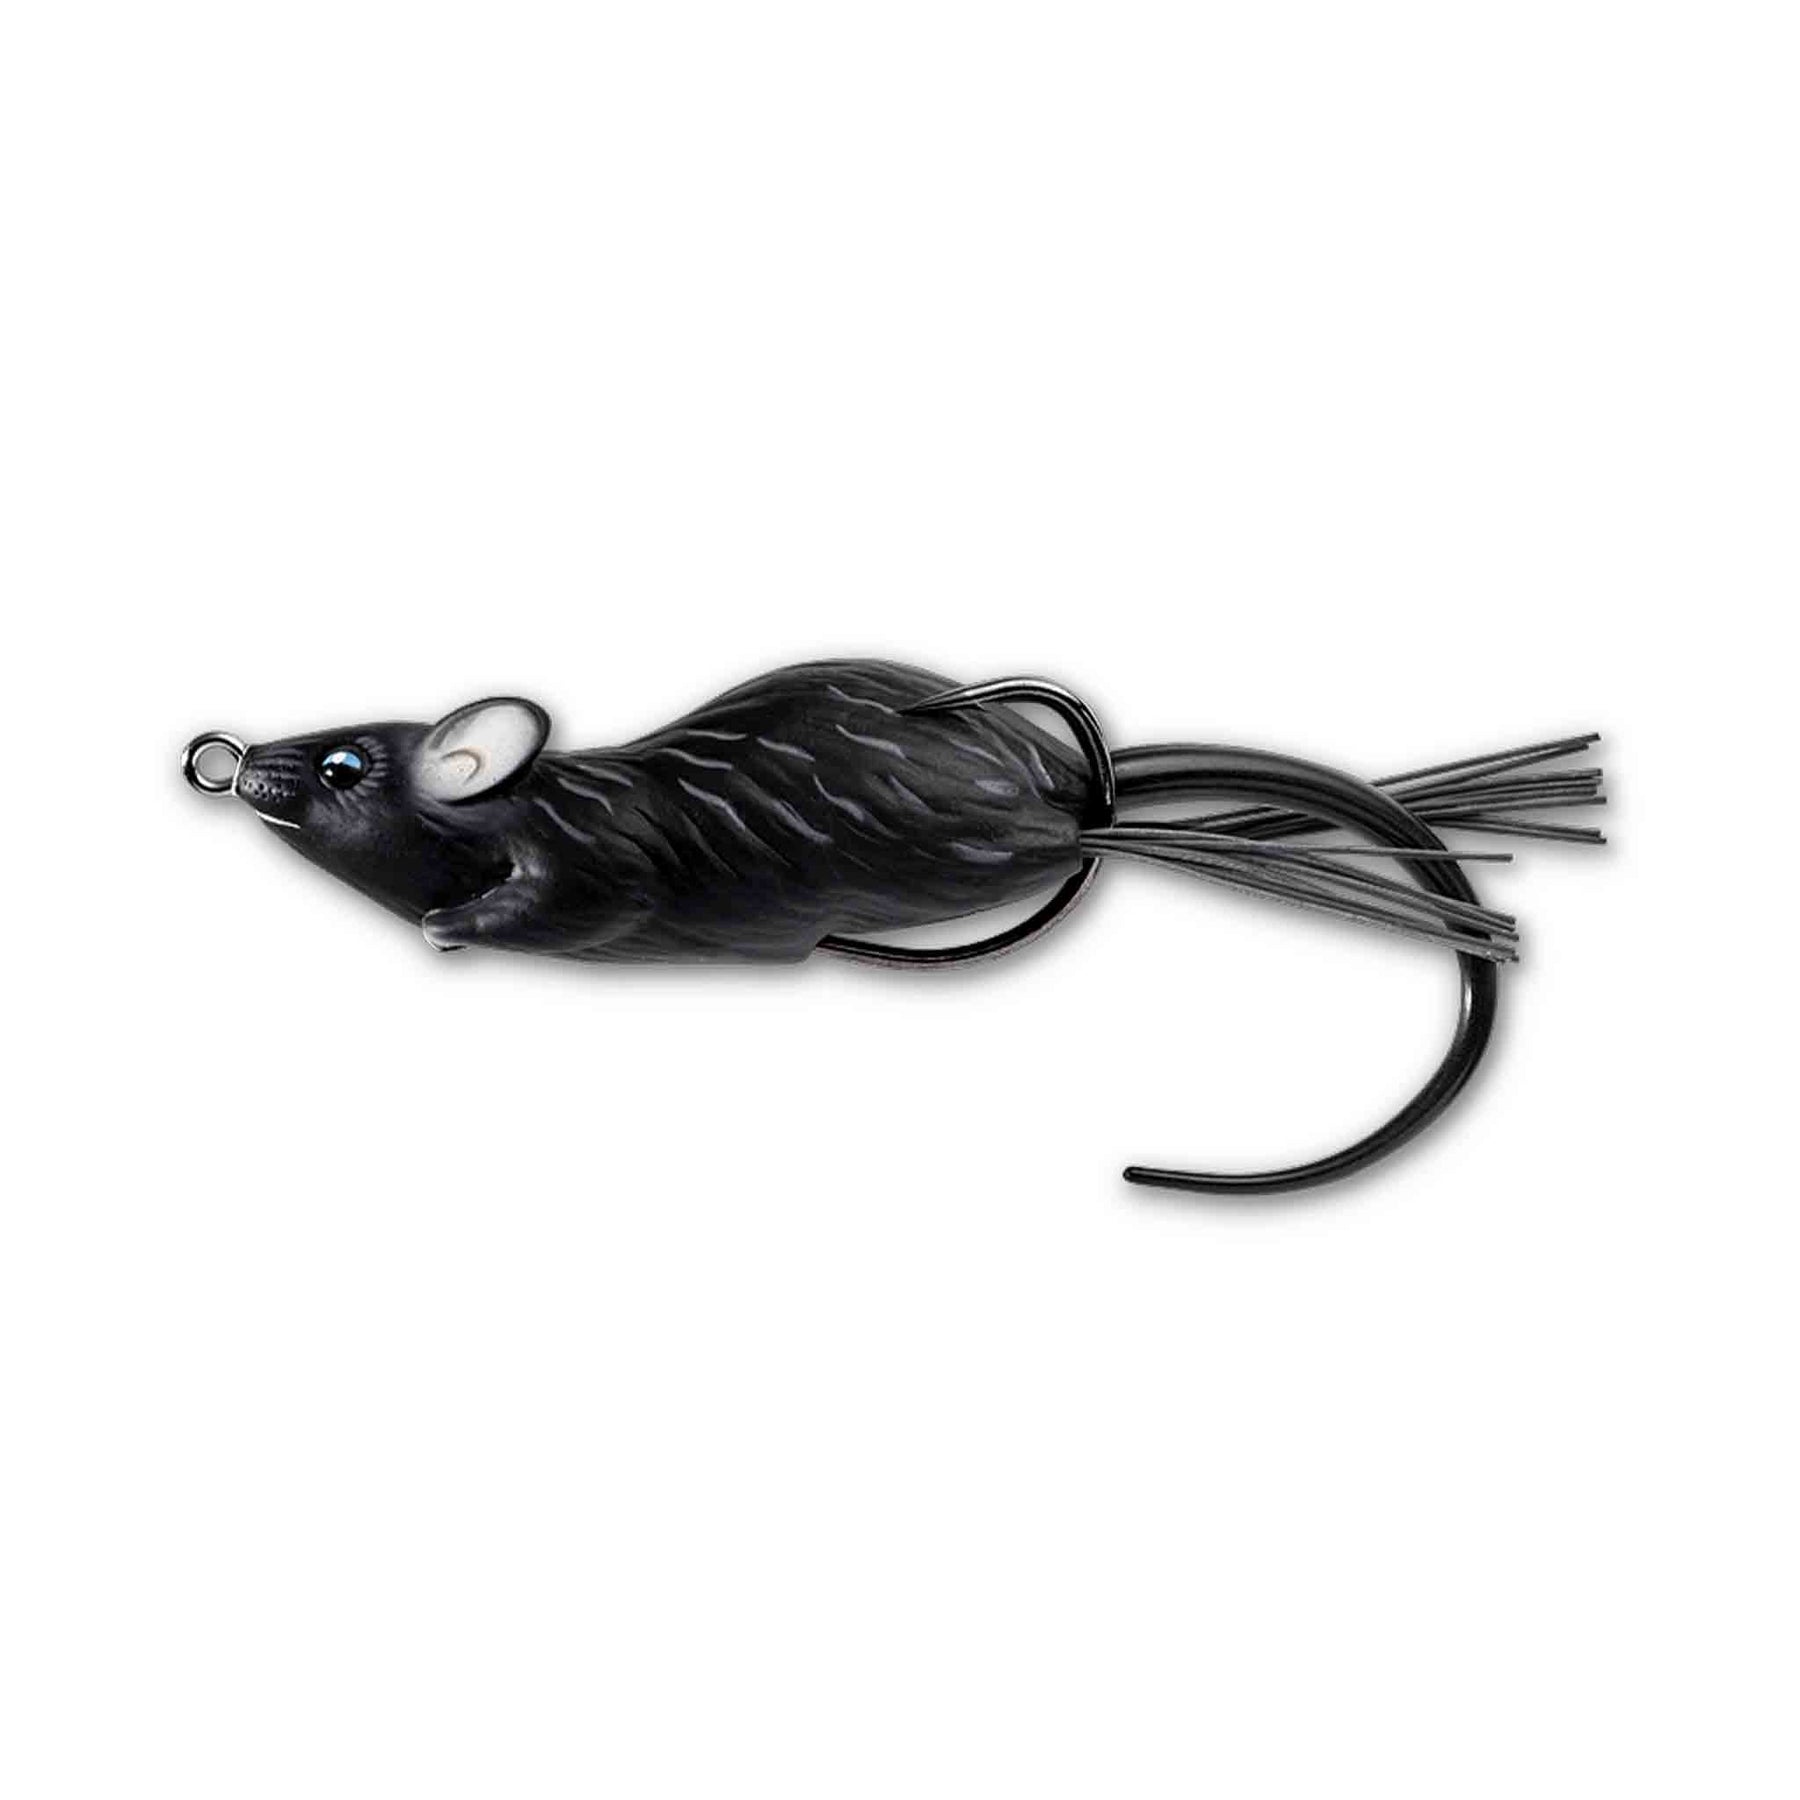 Mouse Hollow Body Swimbait - 3 1/2 in - Live Target